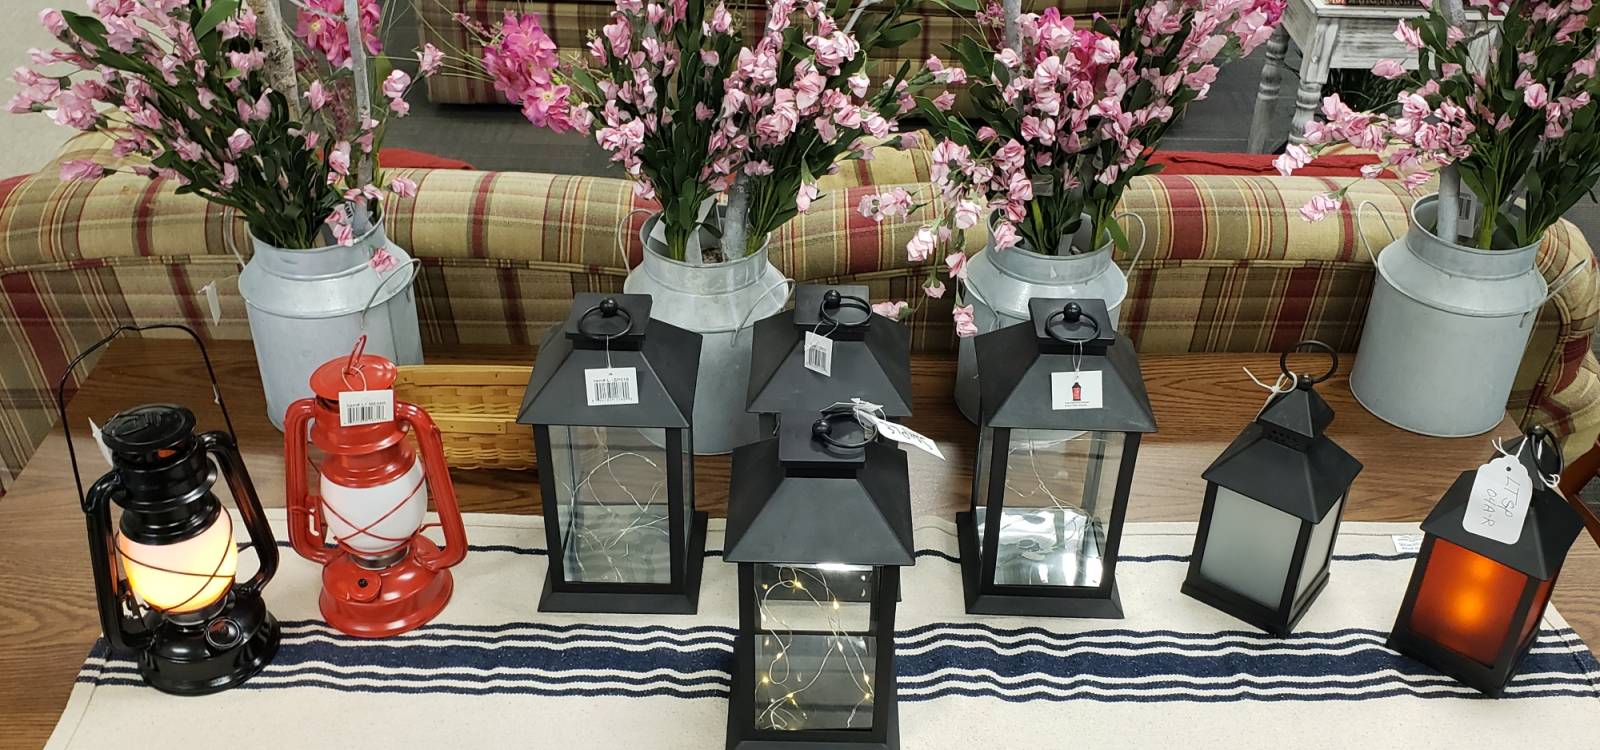 Light the new year with lovely lanterns and beautiful florals!